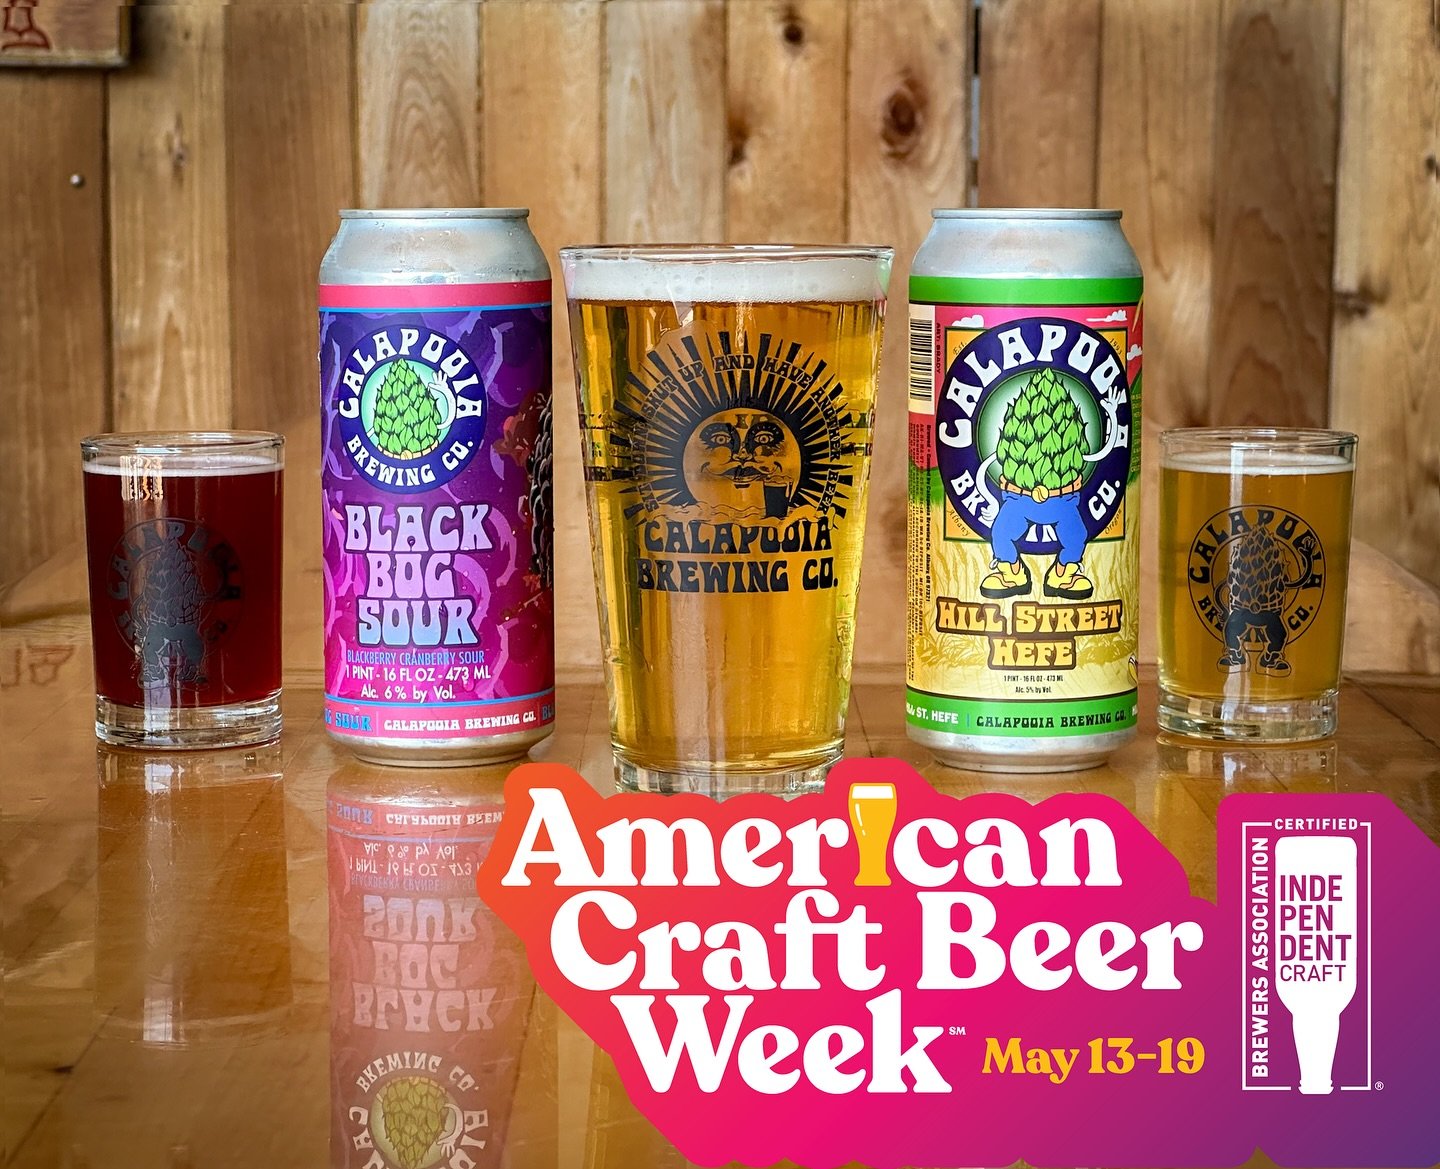 It&rsquo;s American craft beer week! Come in and try our newly released seasonal beers. Black Bog Sour, Kayakers Kolsch and Hill St. Hefe are all bound to quench your thirst on these upcoming warm days. Get out there this week and show some extra lov